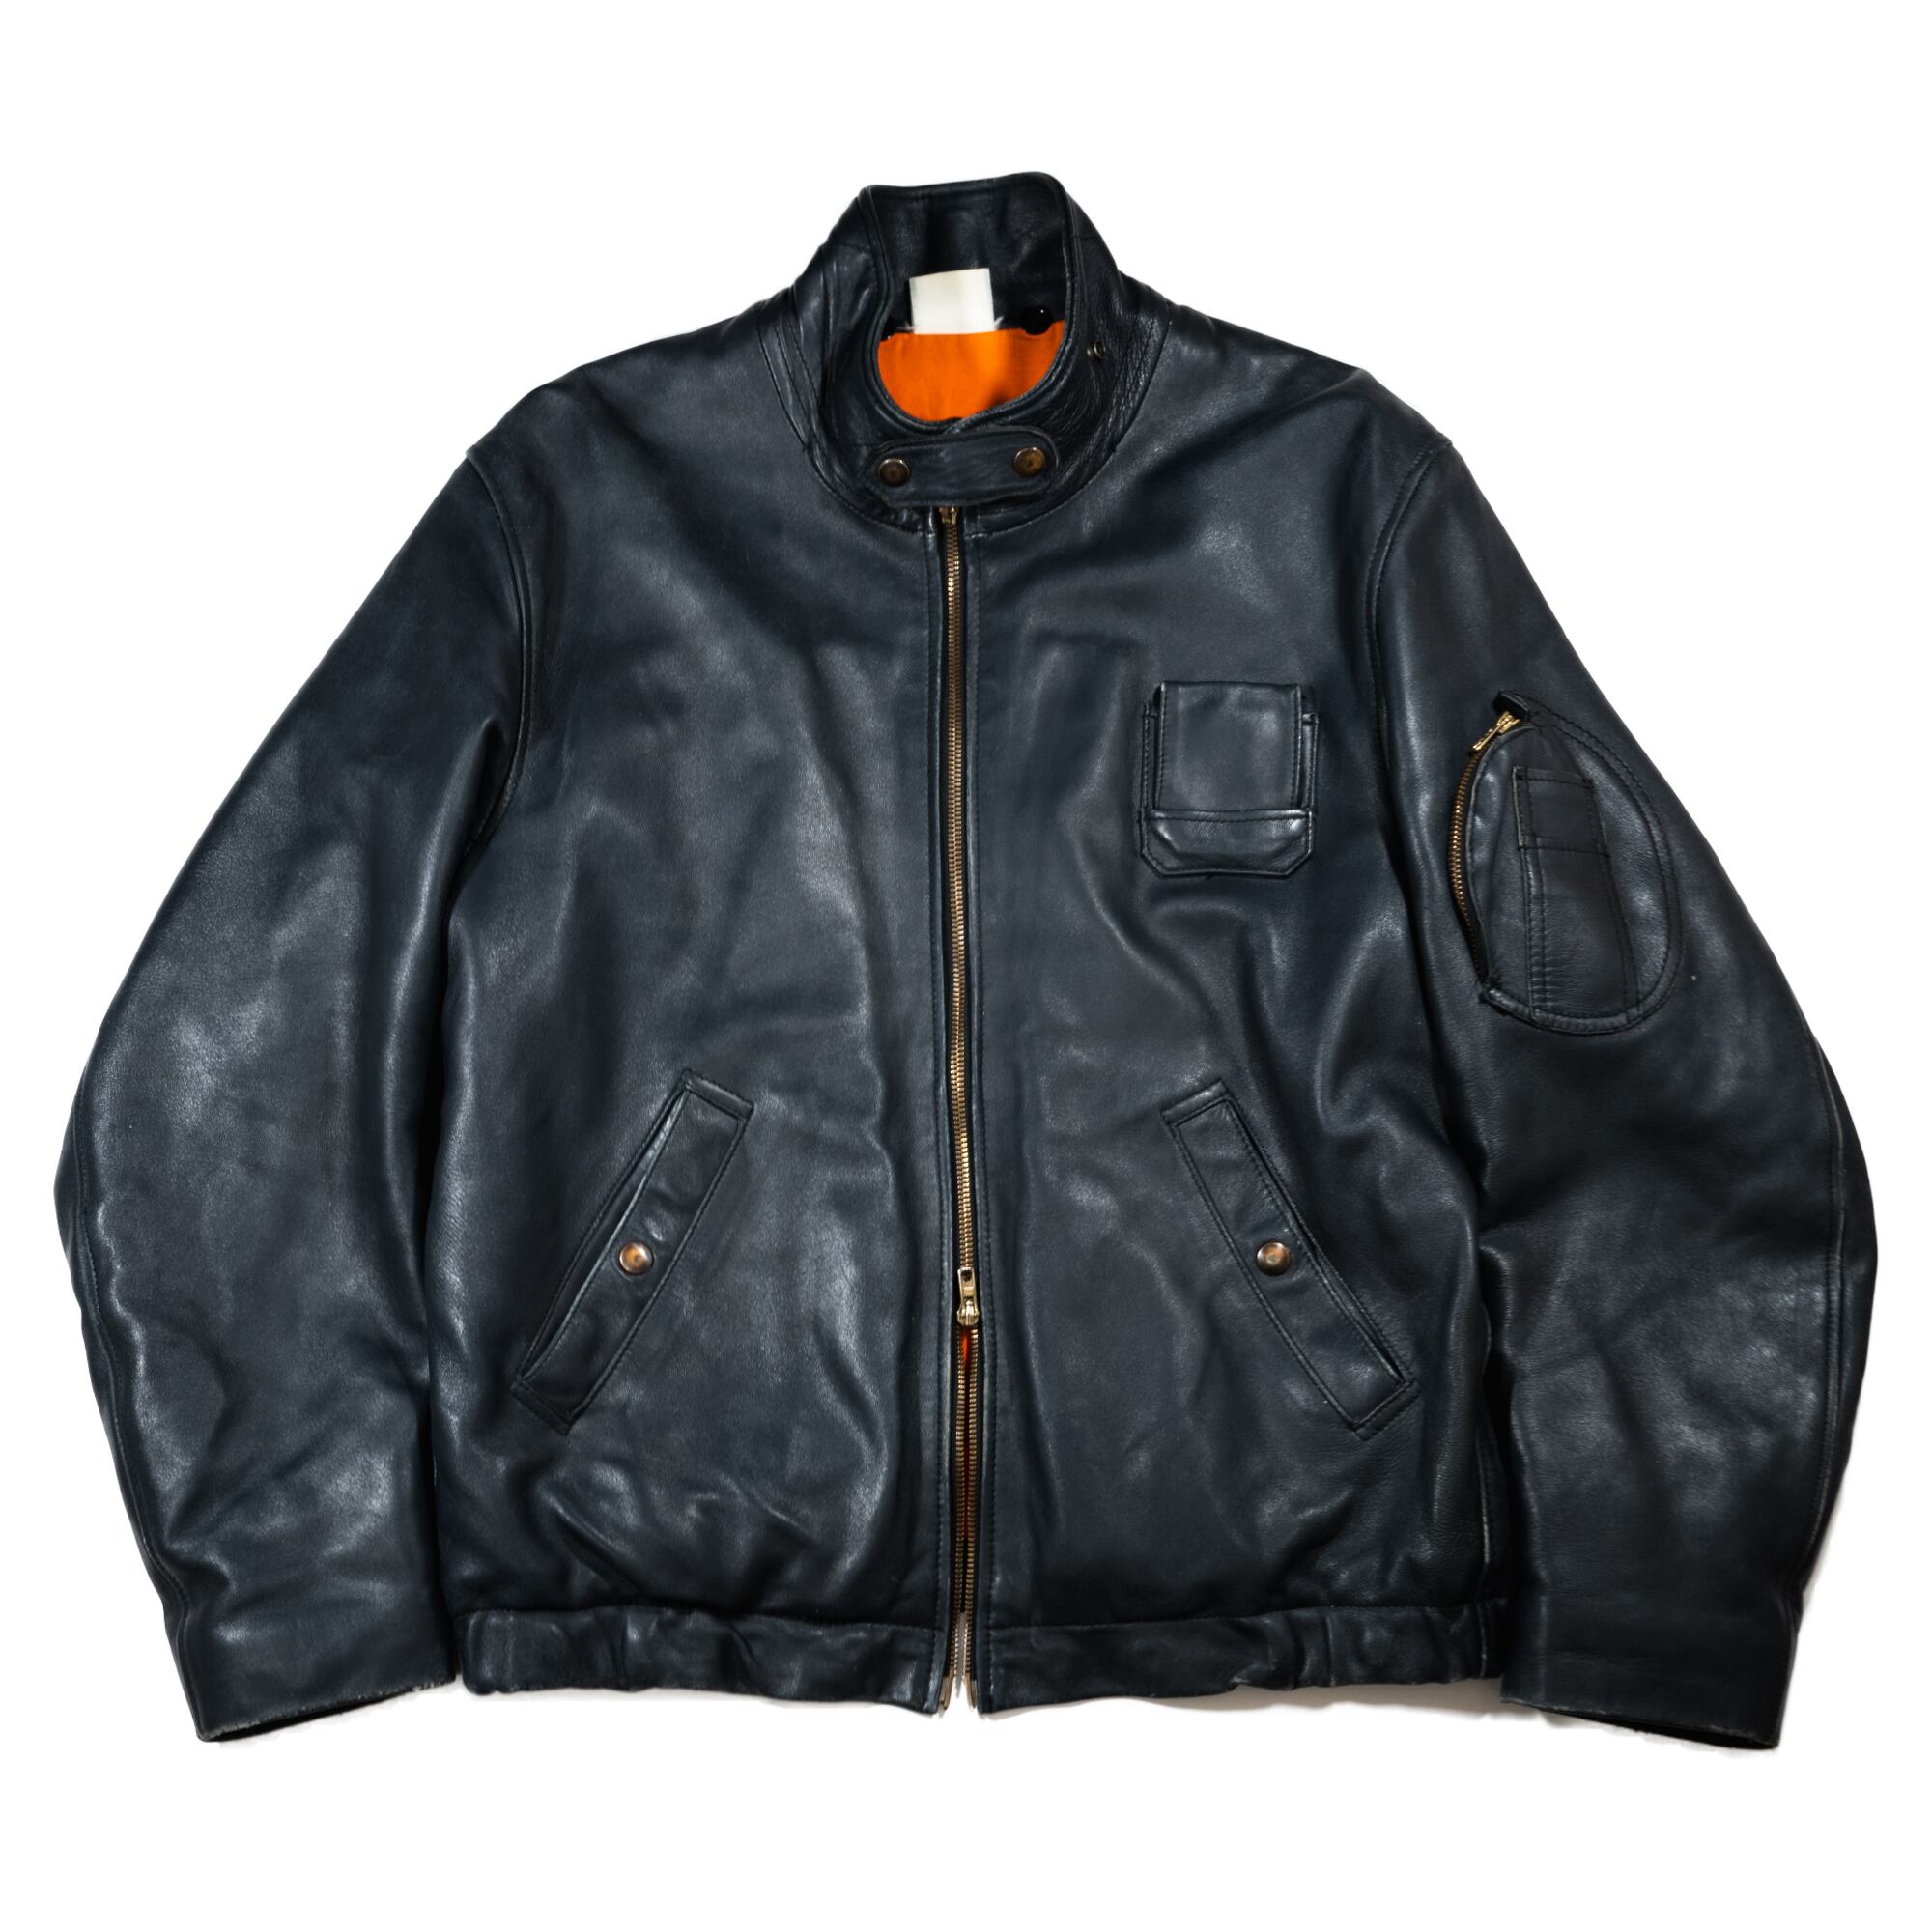 Condition-UsedFrench Leather Pilot Jacket